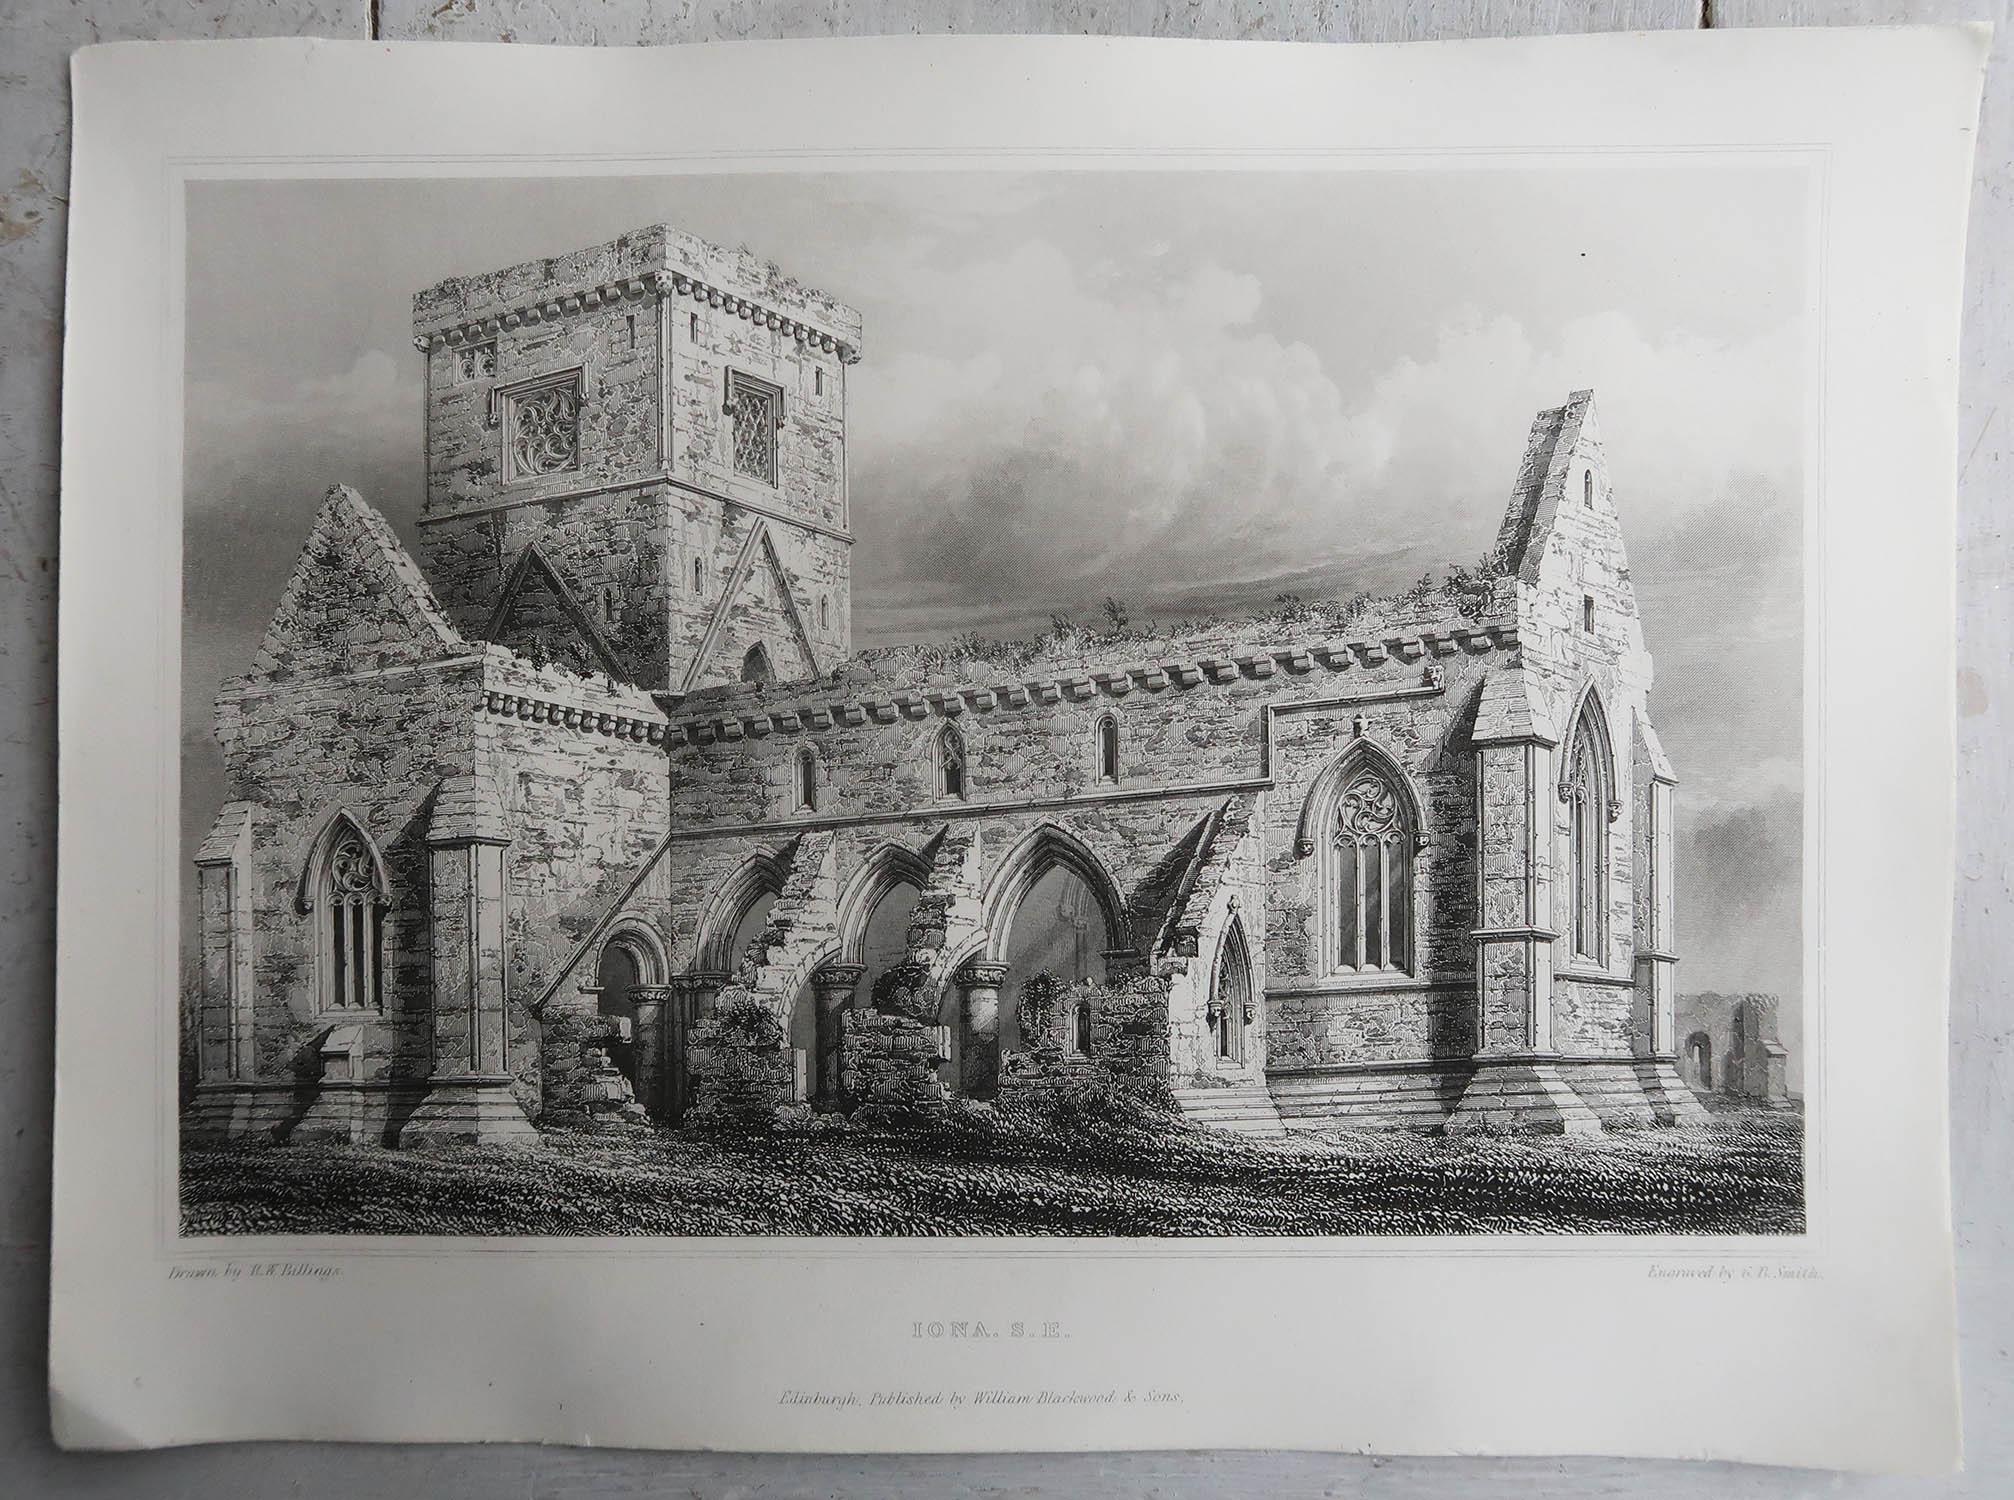 Glorious set of 18 prints of Gothic Architecture in Scotland

Steel engravings. After R.W. Billings

Published by William Blackwood & Sons, Edinburgh. Dated 1848

Unframed.







